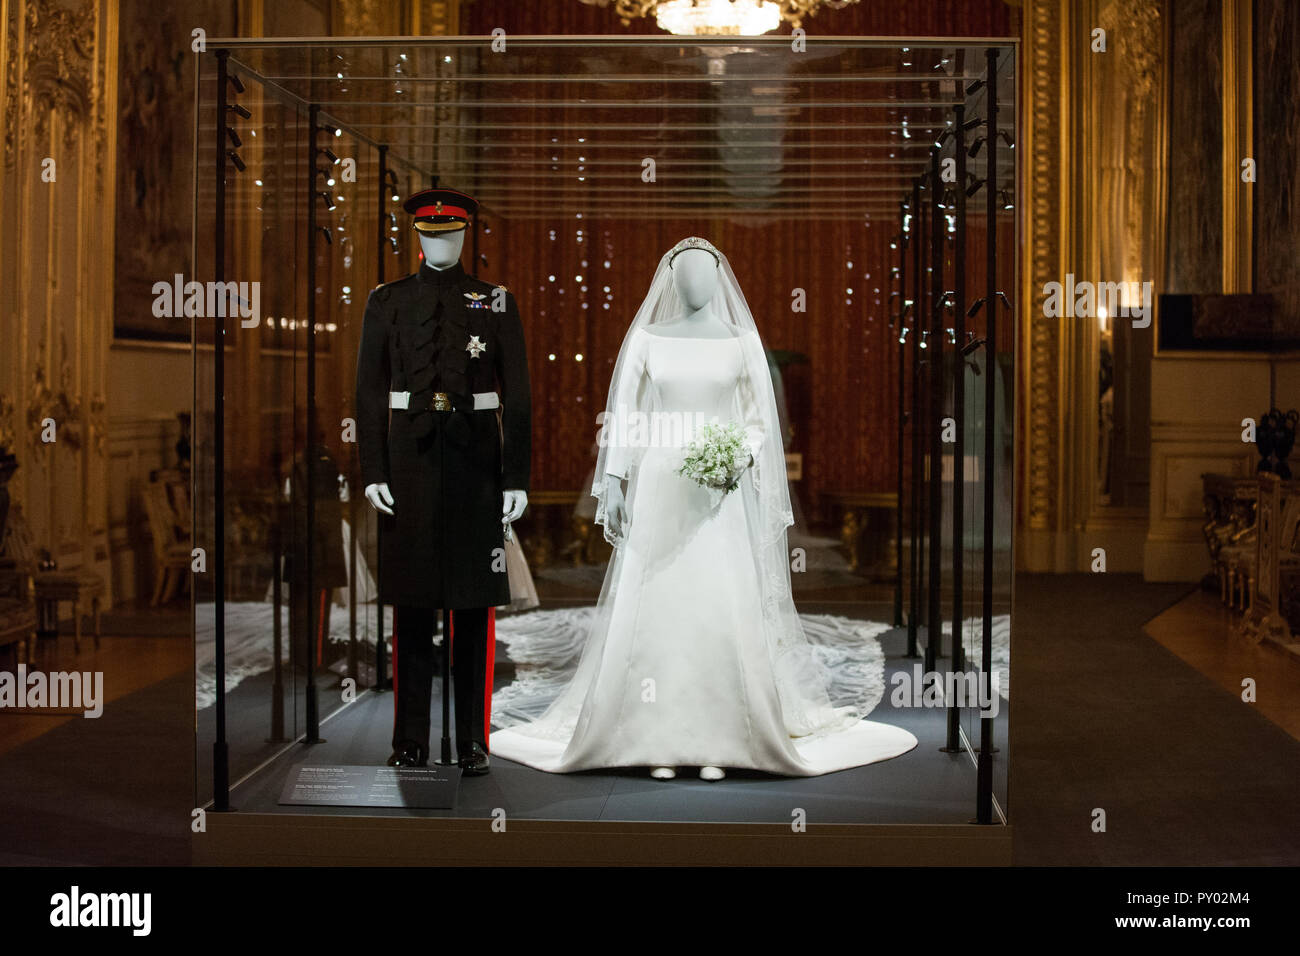 Windsor, UK. 25th October, 2018. IMAGE EMBARGOED FOR PUBLICATION UNTIL 00:01 BST, FRIDAY, 26 OCTOBER. The Duchess of Sussex’s wedding dress, created by the British designer Clare Waight Keller, Artistic Director at the historic French fashion house Givenchy, and the Duke of Sussex's frockcoat uniform of the Household Cavalry will go on display at Windsor Castle from 26th October 2018 to 6th January 2019 as part of a special exhibition entitled 'A Royal Wedding: The Duke and Duchess of Sussex'. Credit: Mark Kerrison/Alamy Live News Stock Photo